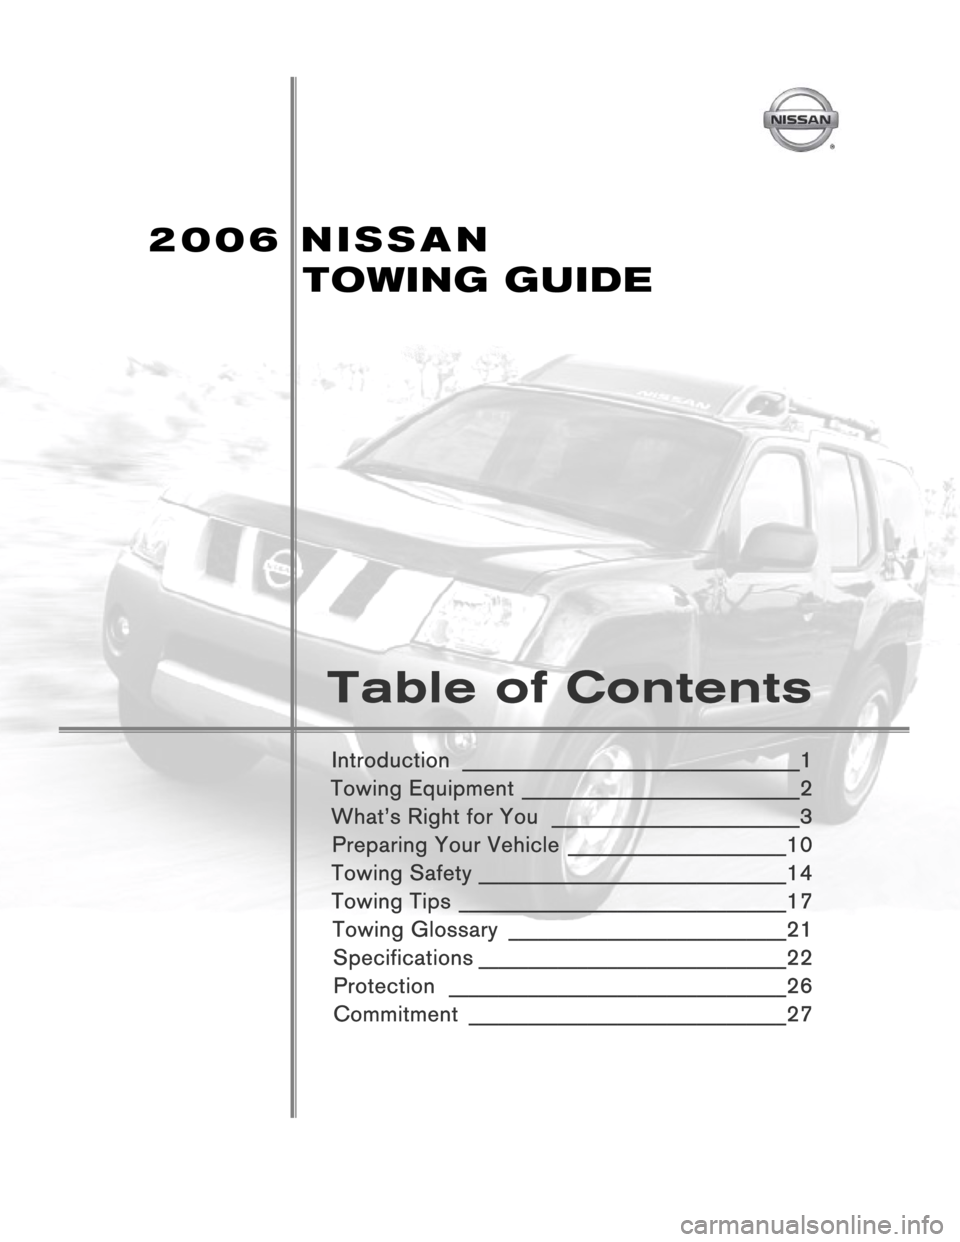 NISSAN FRONTIER 2006 D22 / 1.G Towing Guide  
 
 
 
 
 
 
 
 
 
 
 
 
 
 
 
 
 
 
 
 
 
Table of Contents 
 
Introduction __________________________________1 
Towing Equipment
 ____________________________2 
What’s Right for You
 ____________